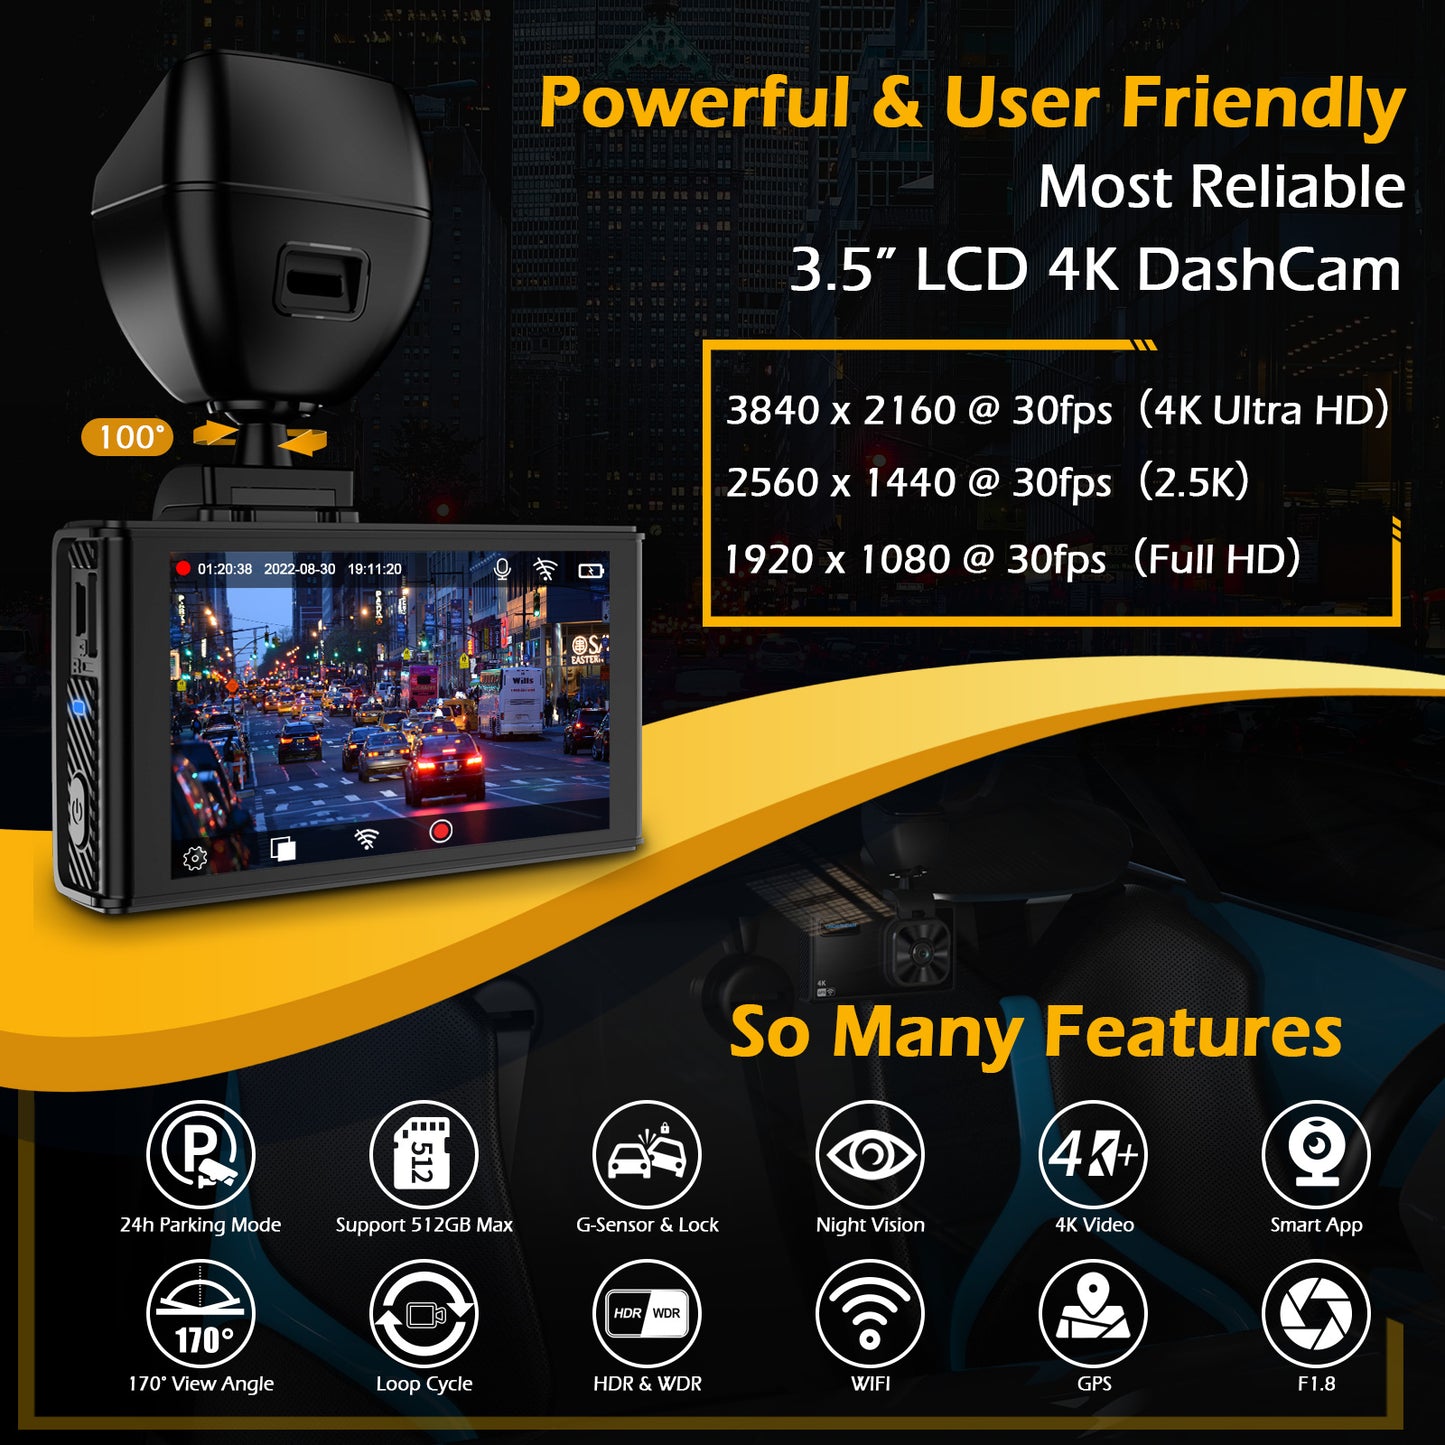  ONDASHCAM 4K Dash Cam with Built-in WiFi GPS, 2160P